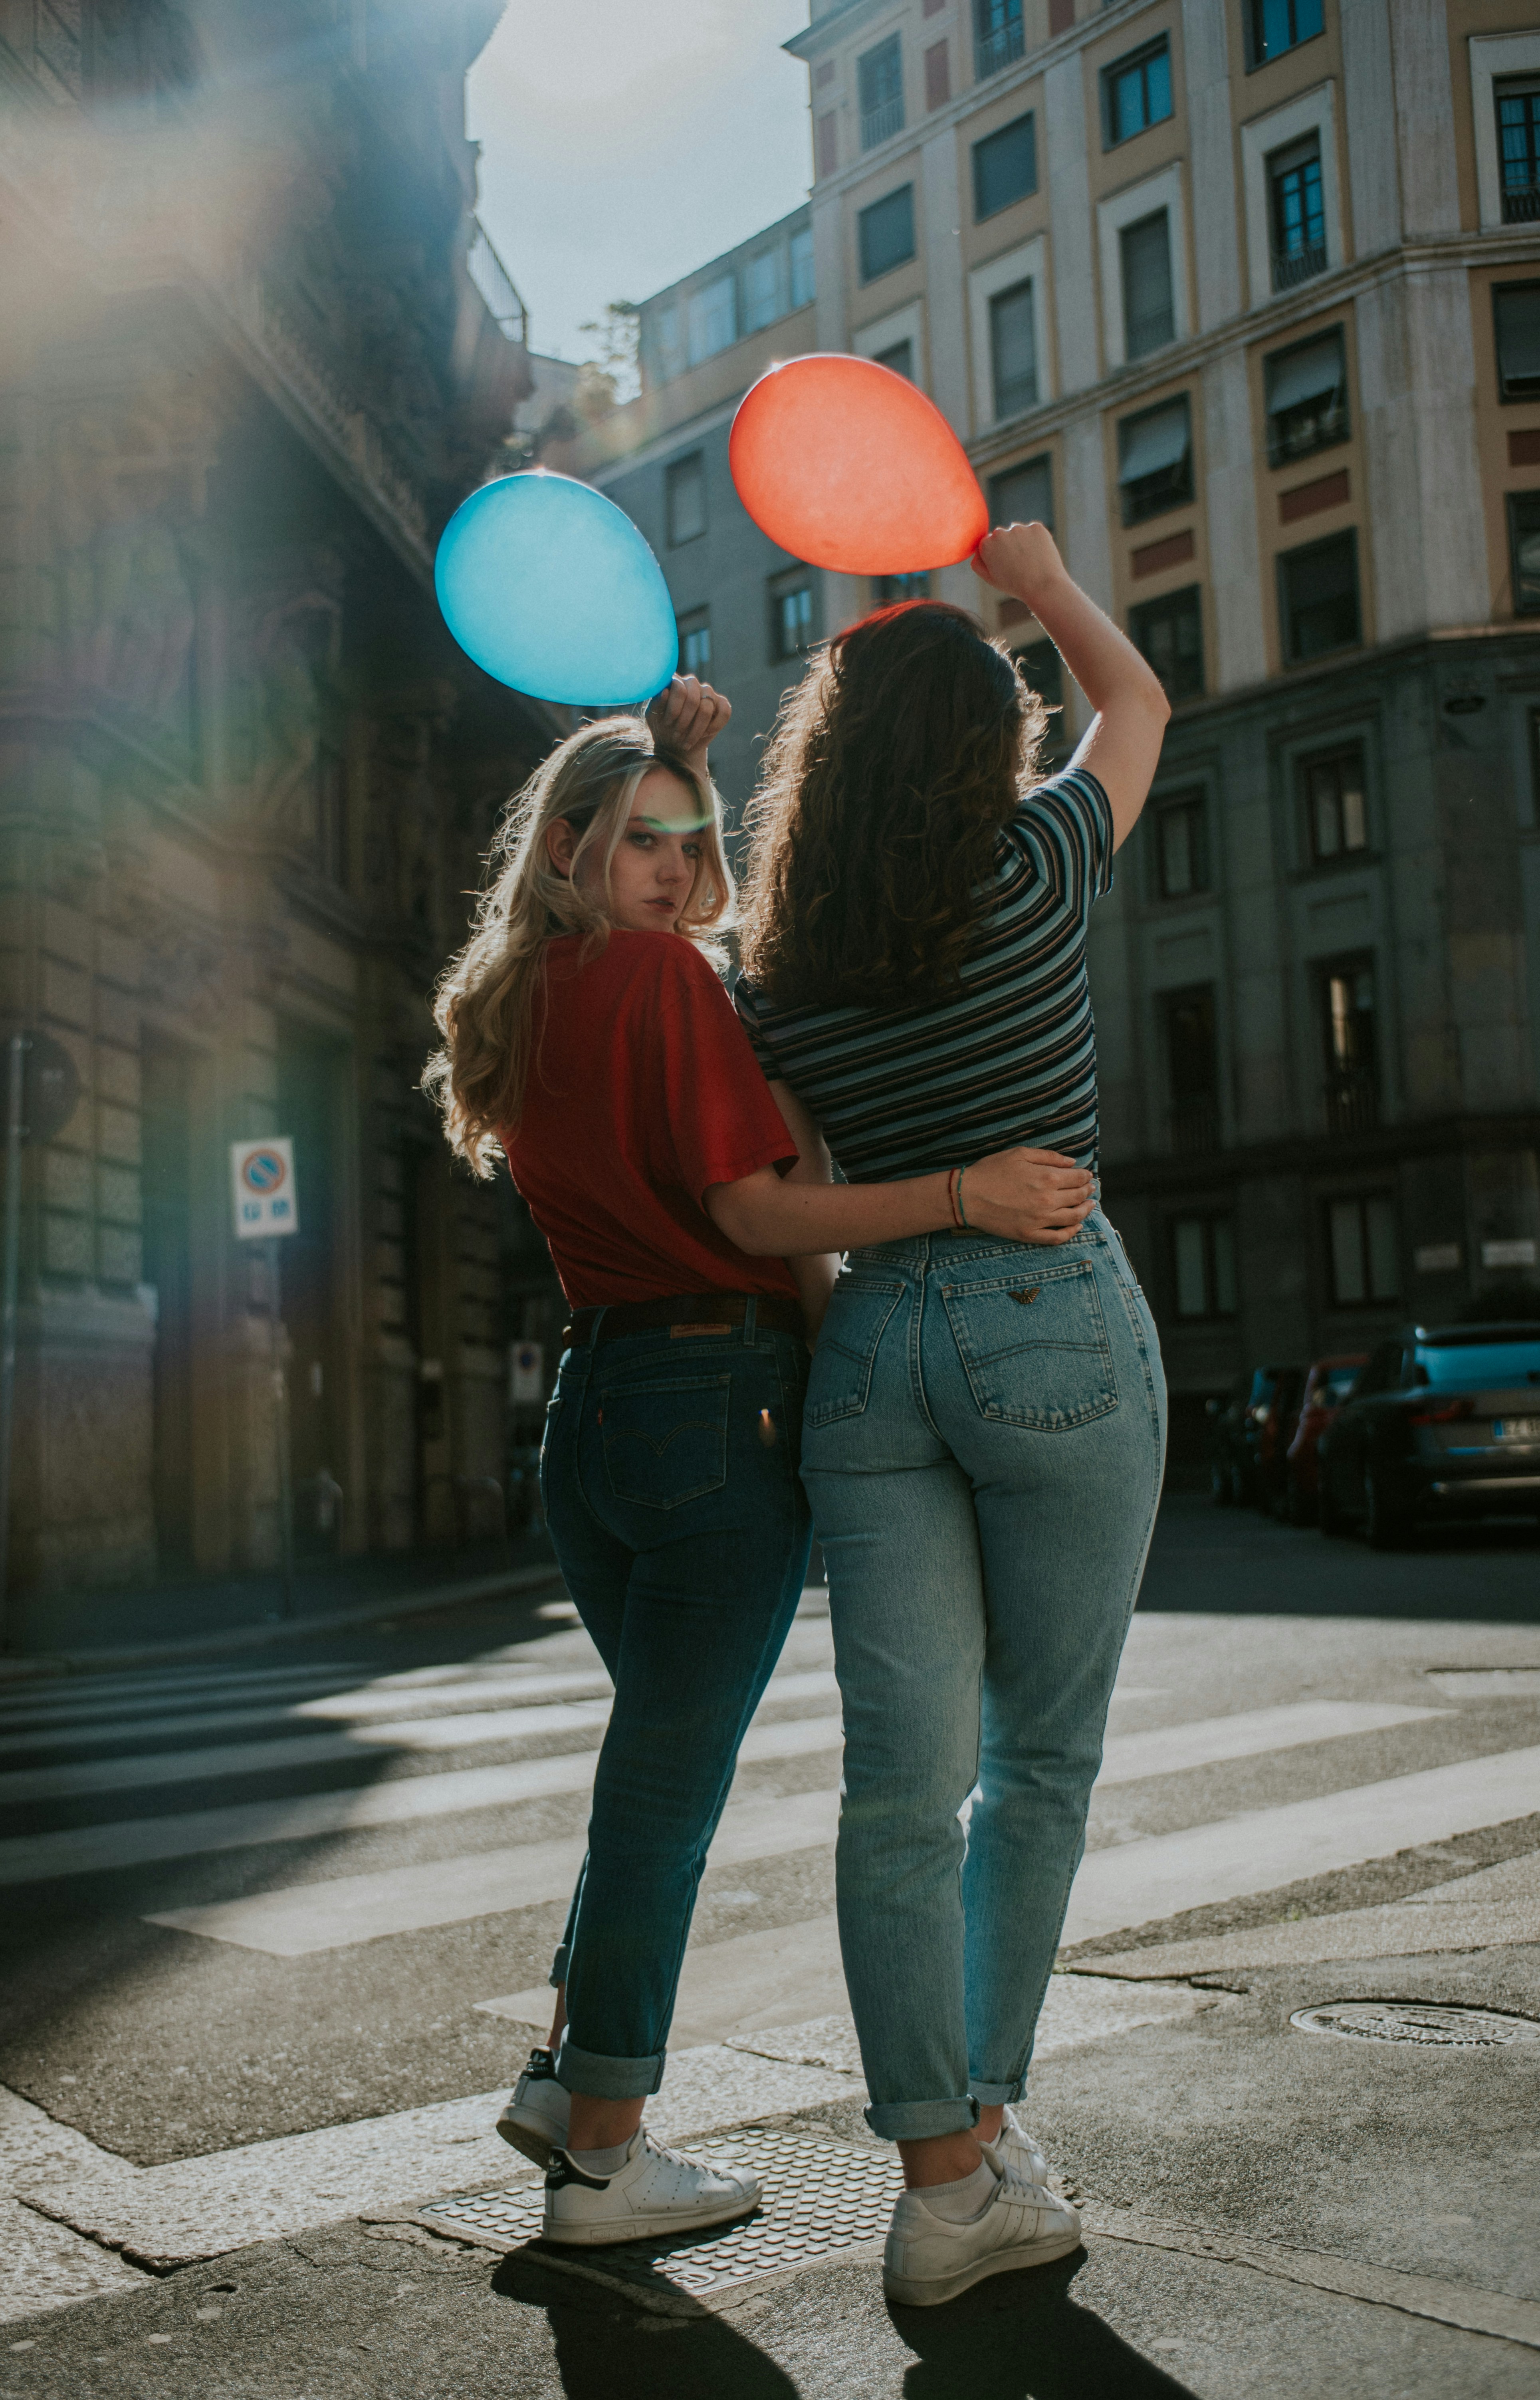 Two girls with balloons